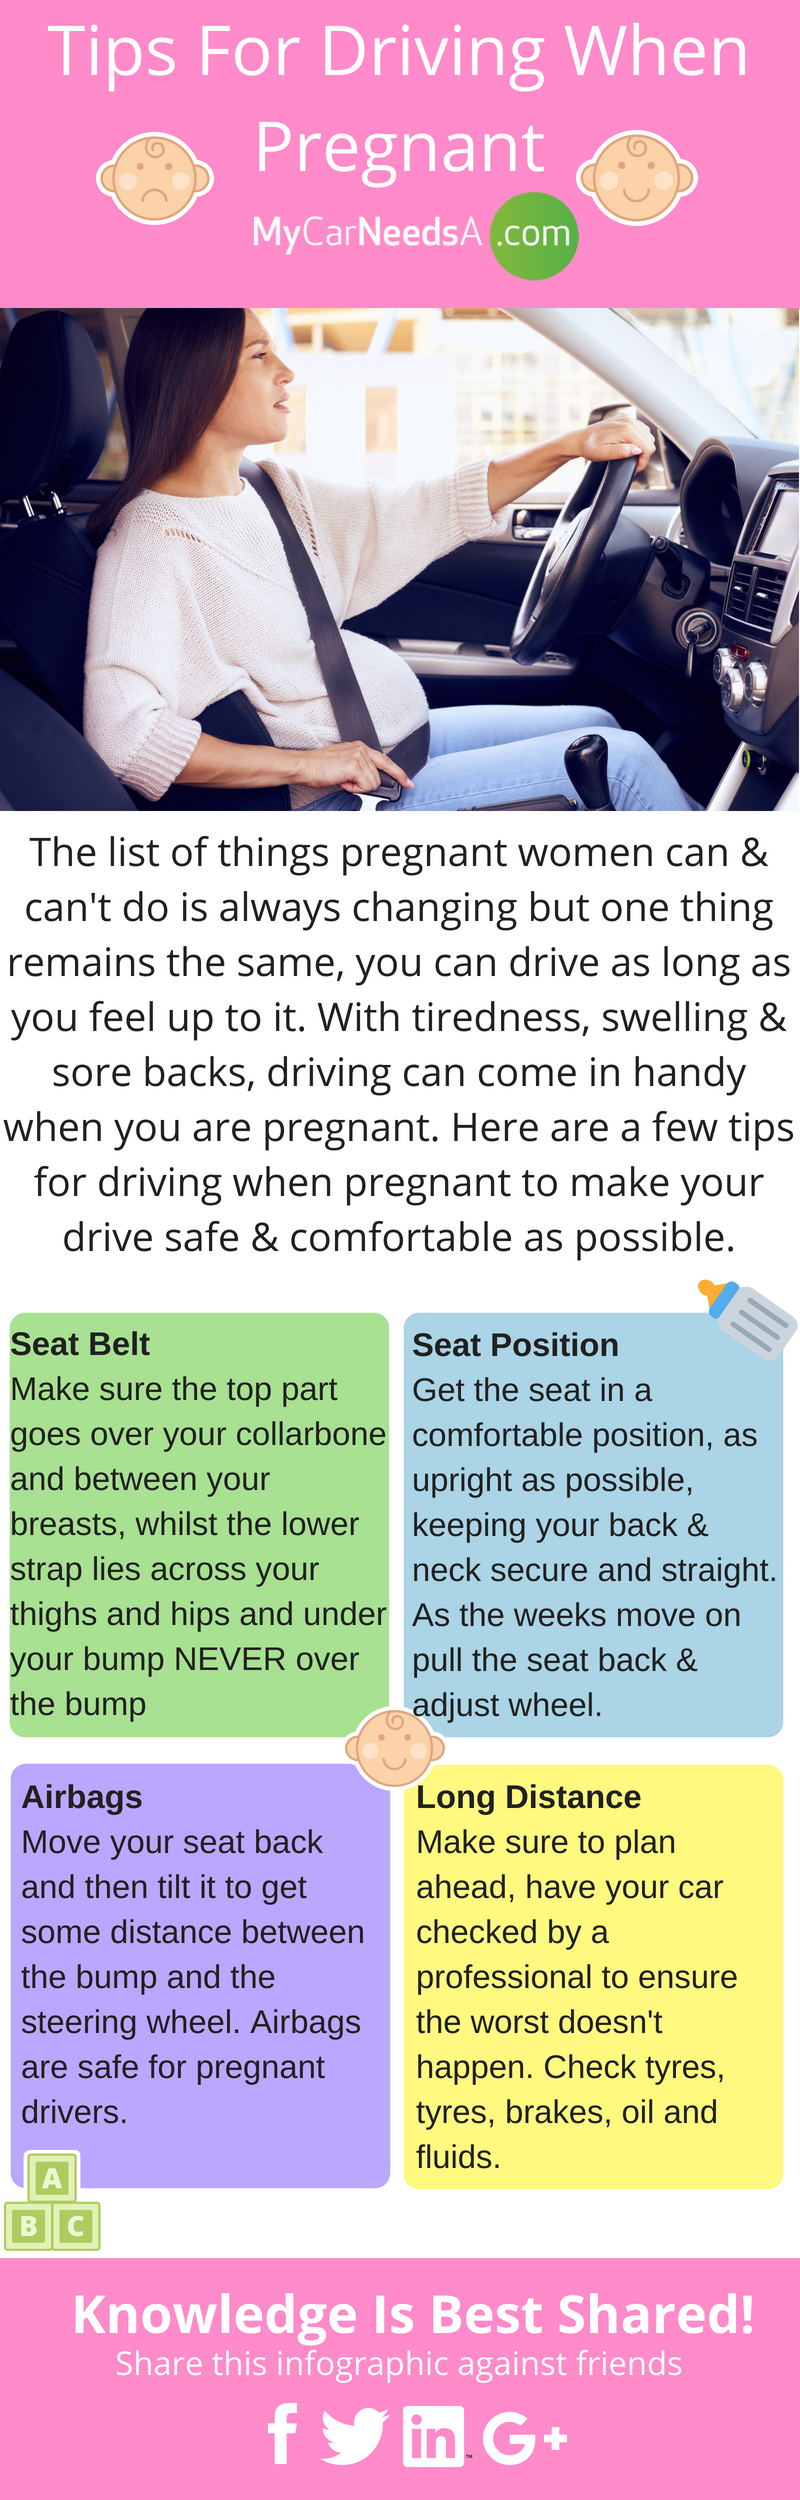 Driving Pregnant Tips 